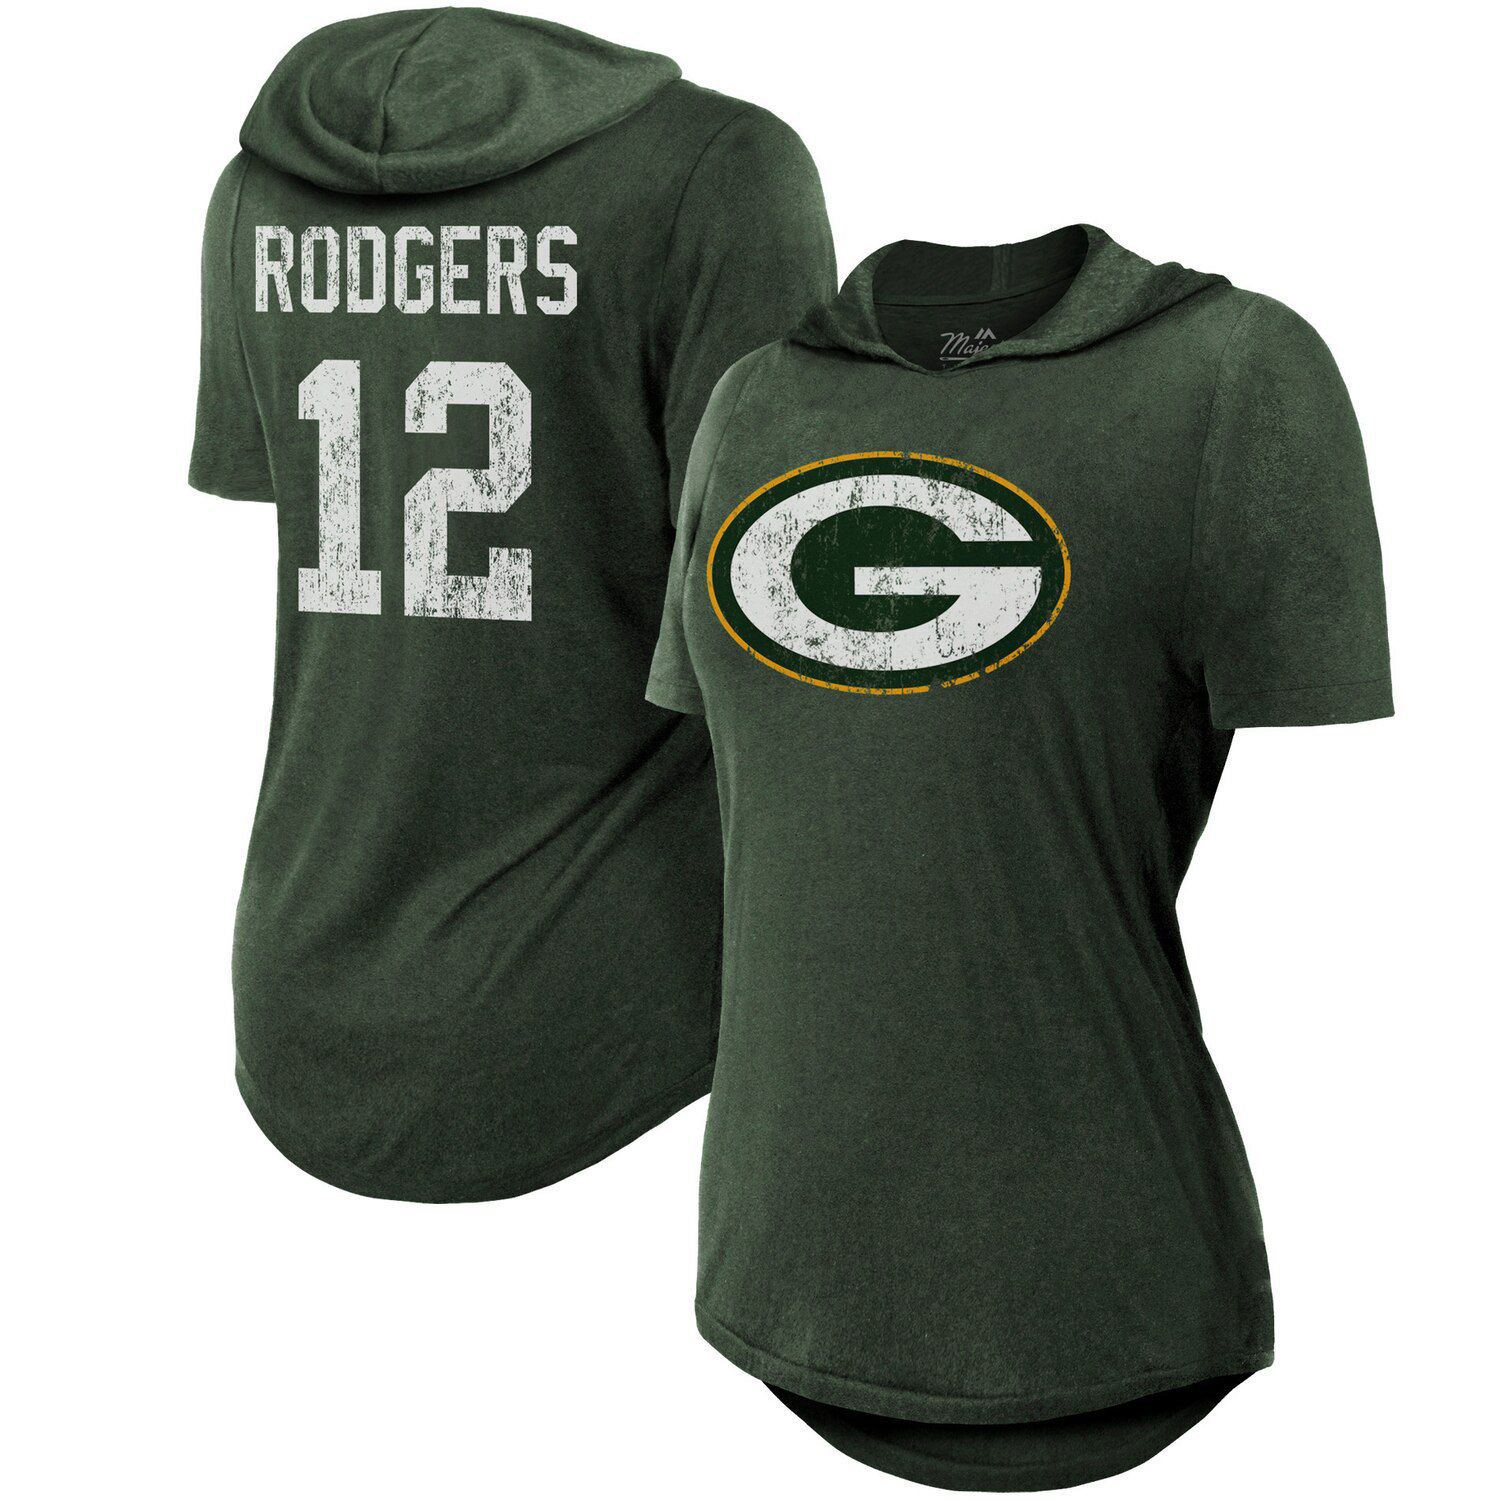 aaron rodgers official jersey